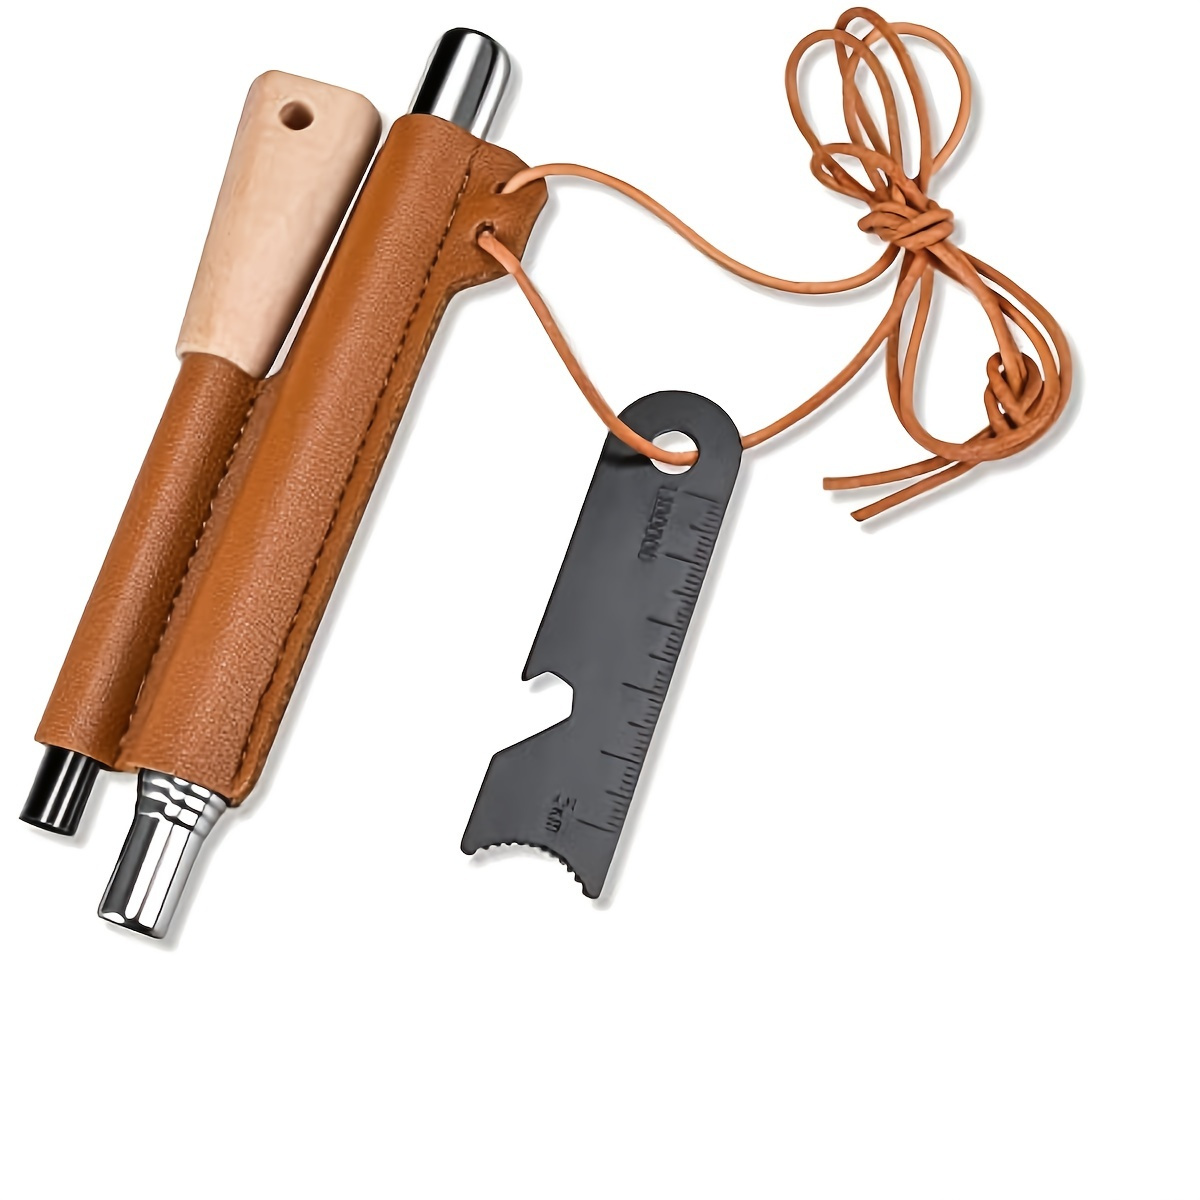 

Ultimate Fire Starter Survival Tool Kit With Wood Handle, Flint And Steel, Fire Bellowing, Wax Infused Tinder Rope, And Multi-tool Striker For Emergency Survival And Outdoor Adventures